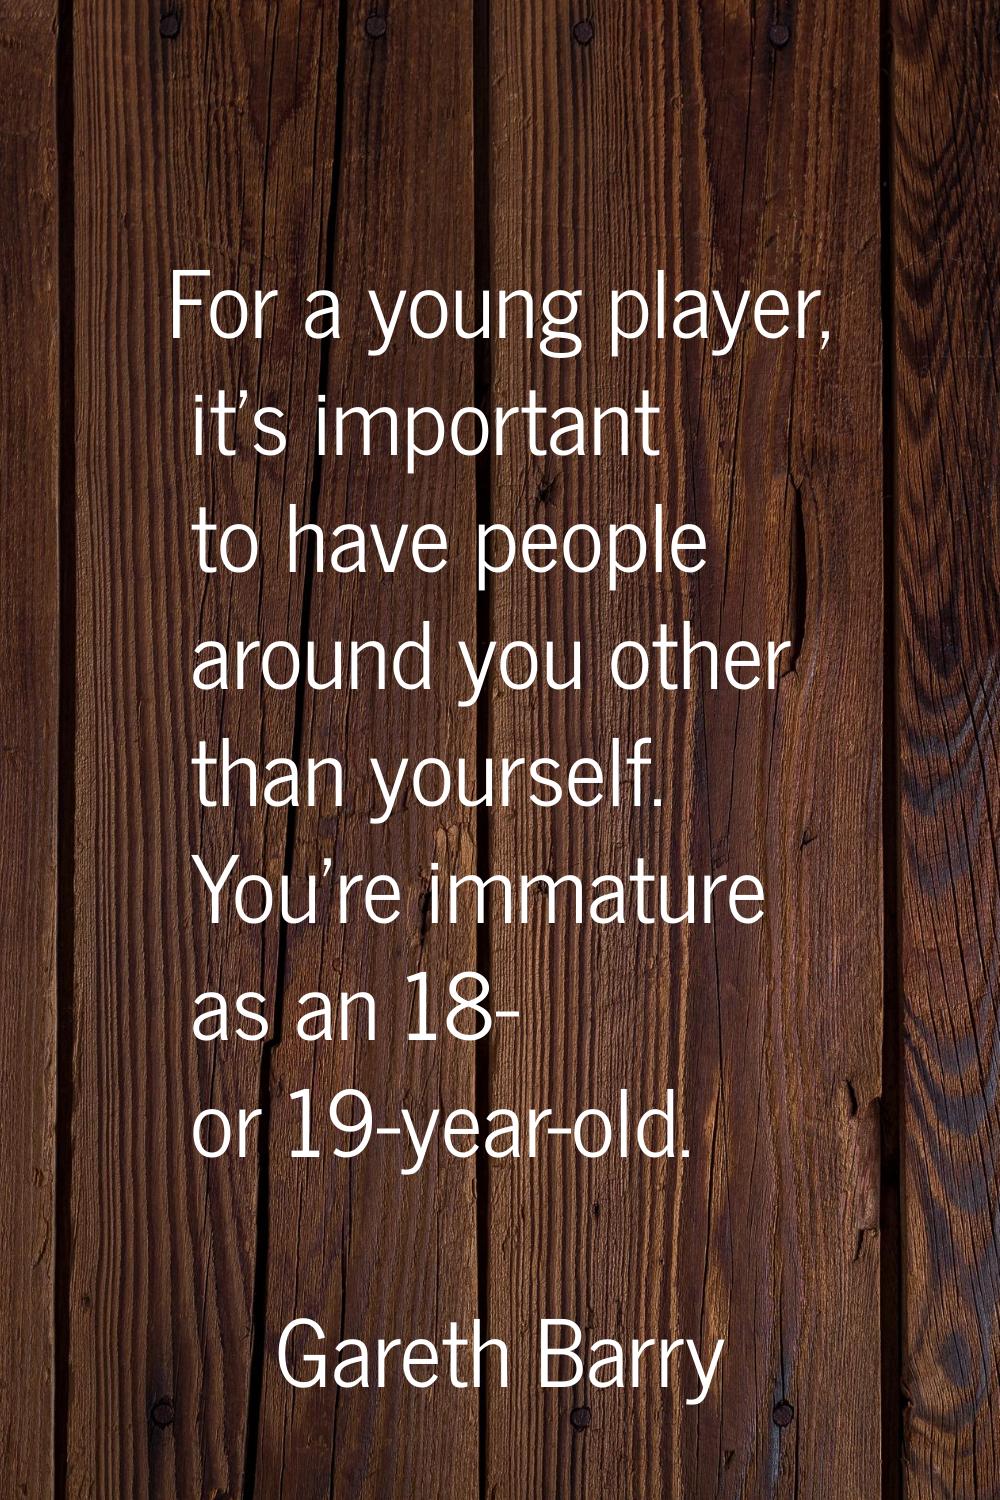 For a young player, it's important to have people around you other than yourself. You're immature a